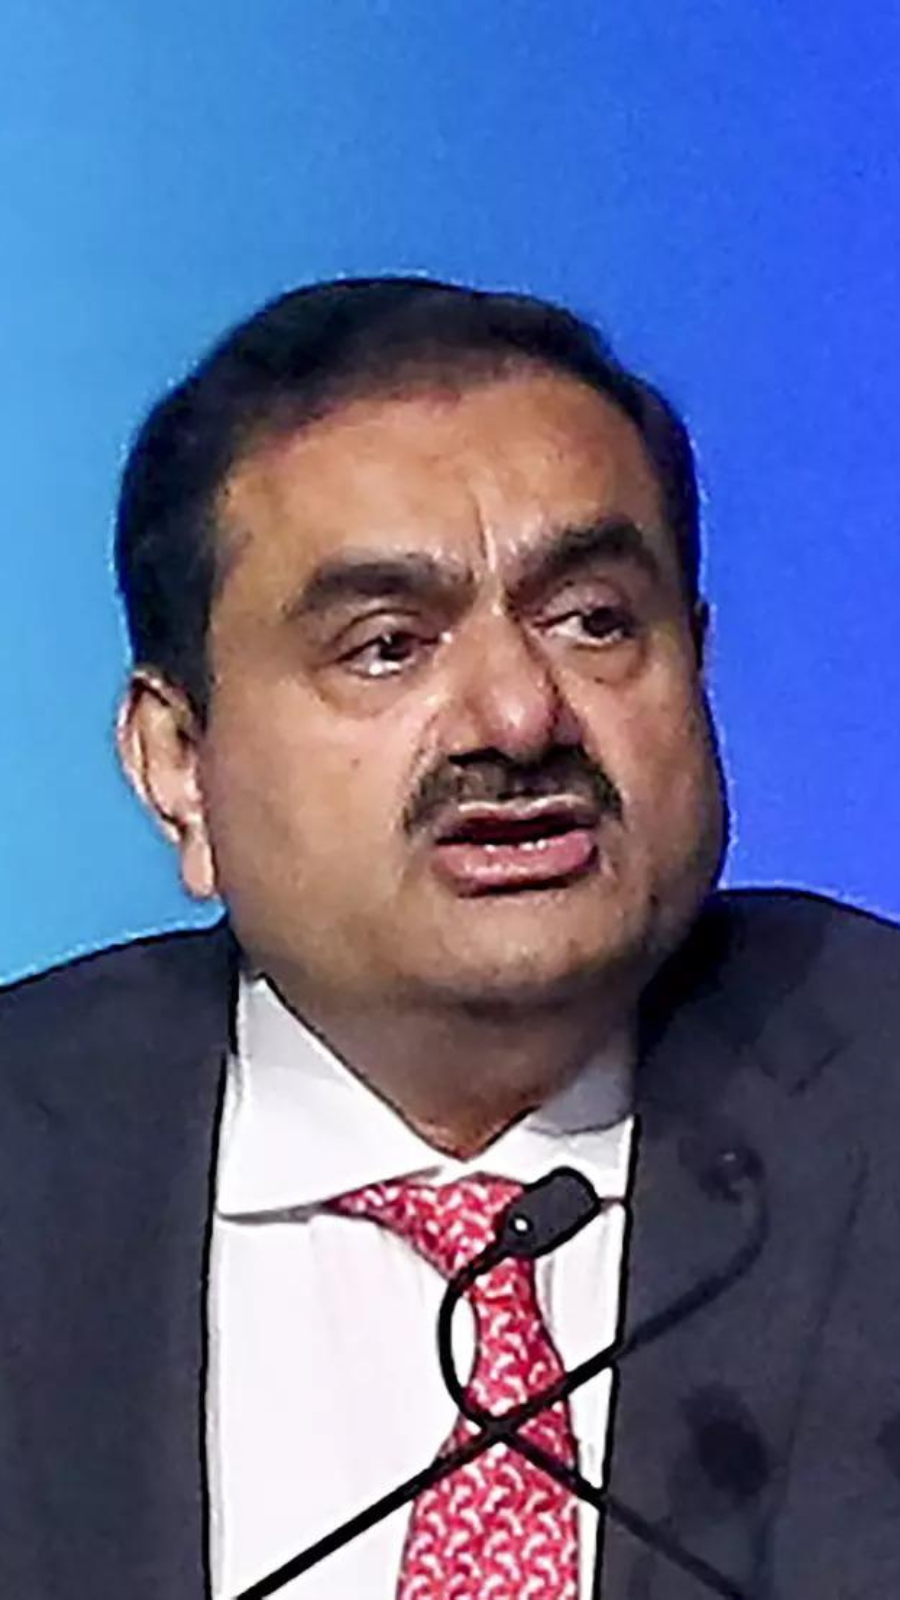 A Rs 400 crore home and other expensive things Gautam Adani owns